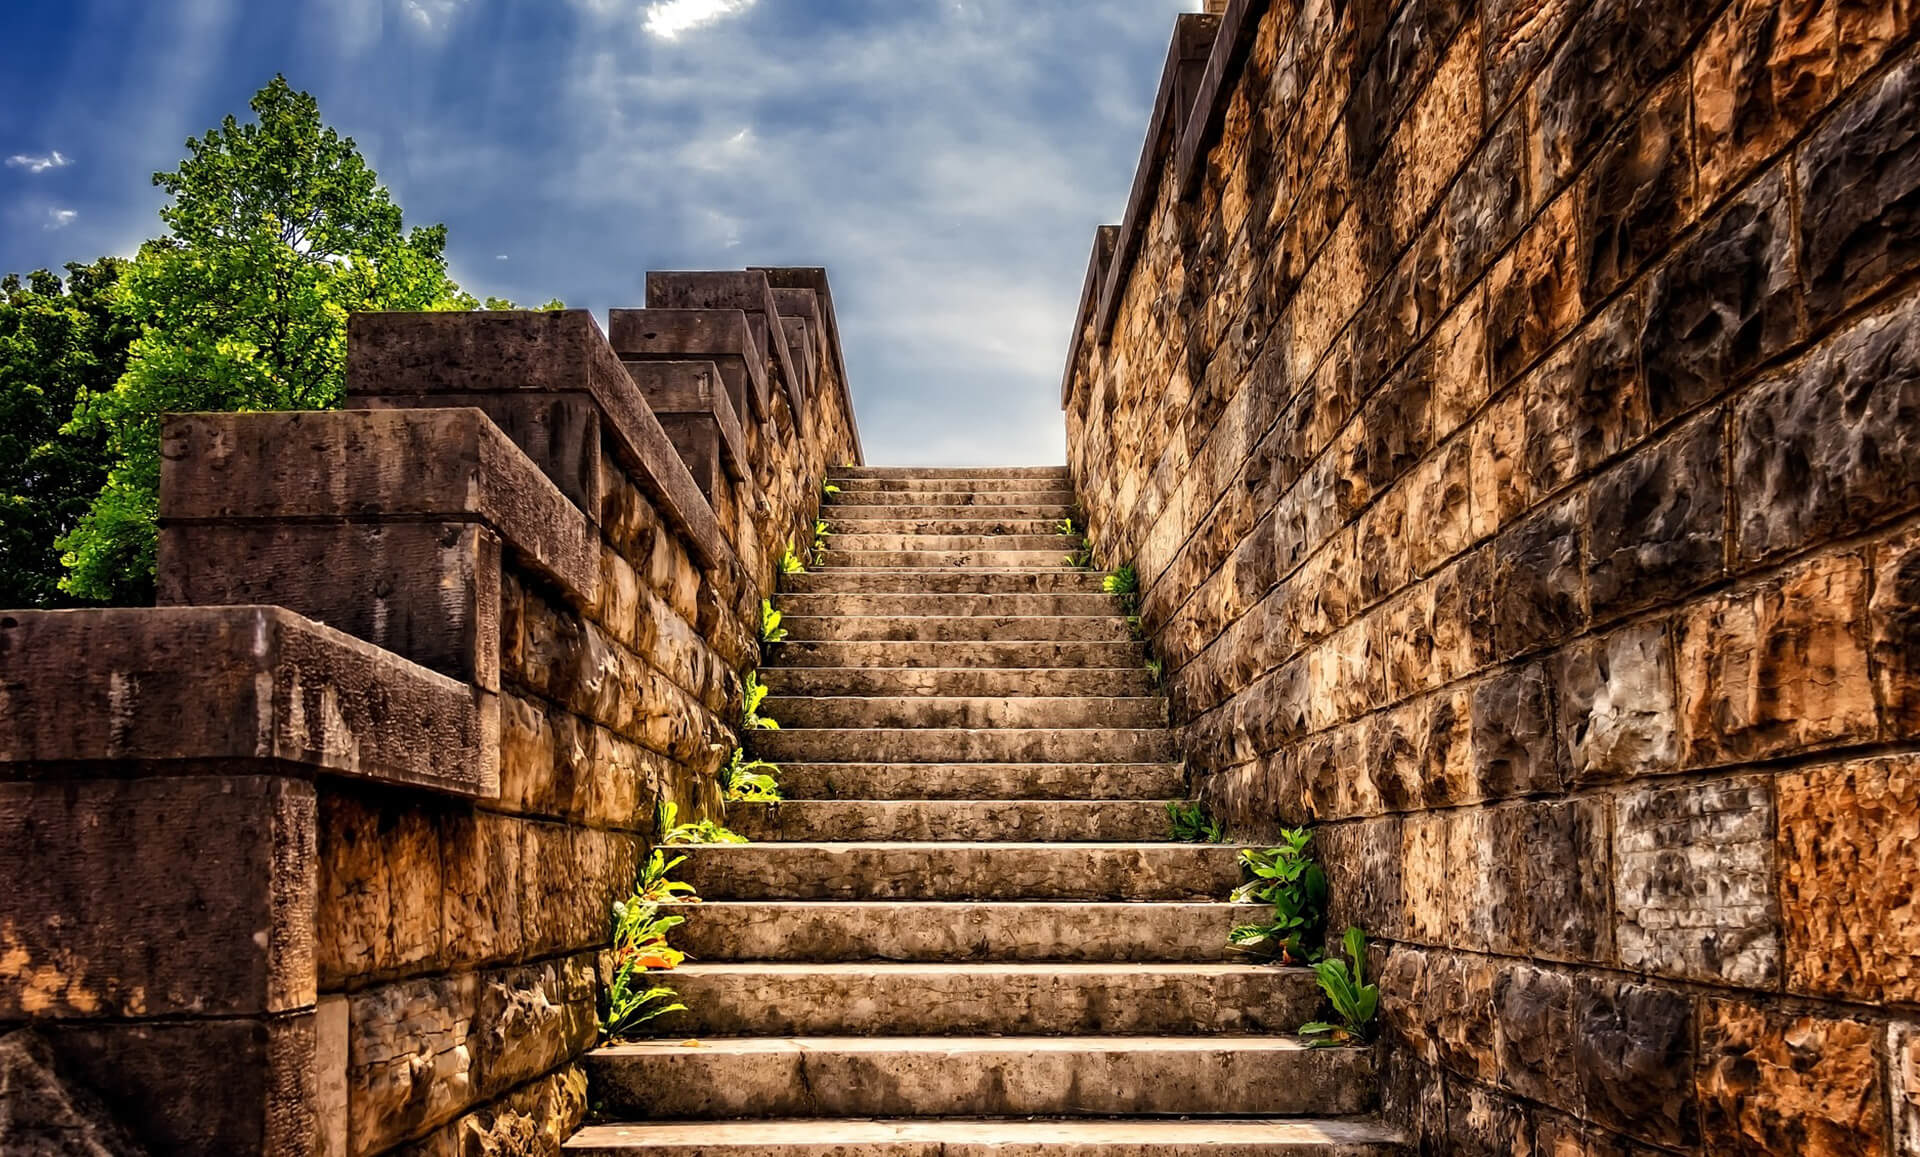 Stone stairs going up-enewsletter-Benny Hinn Ministries